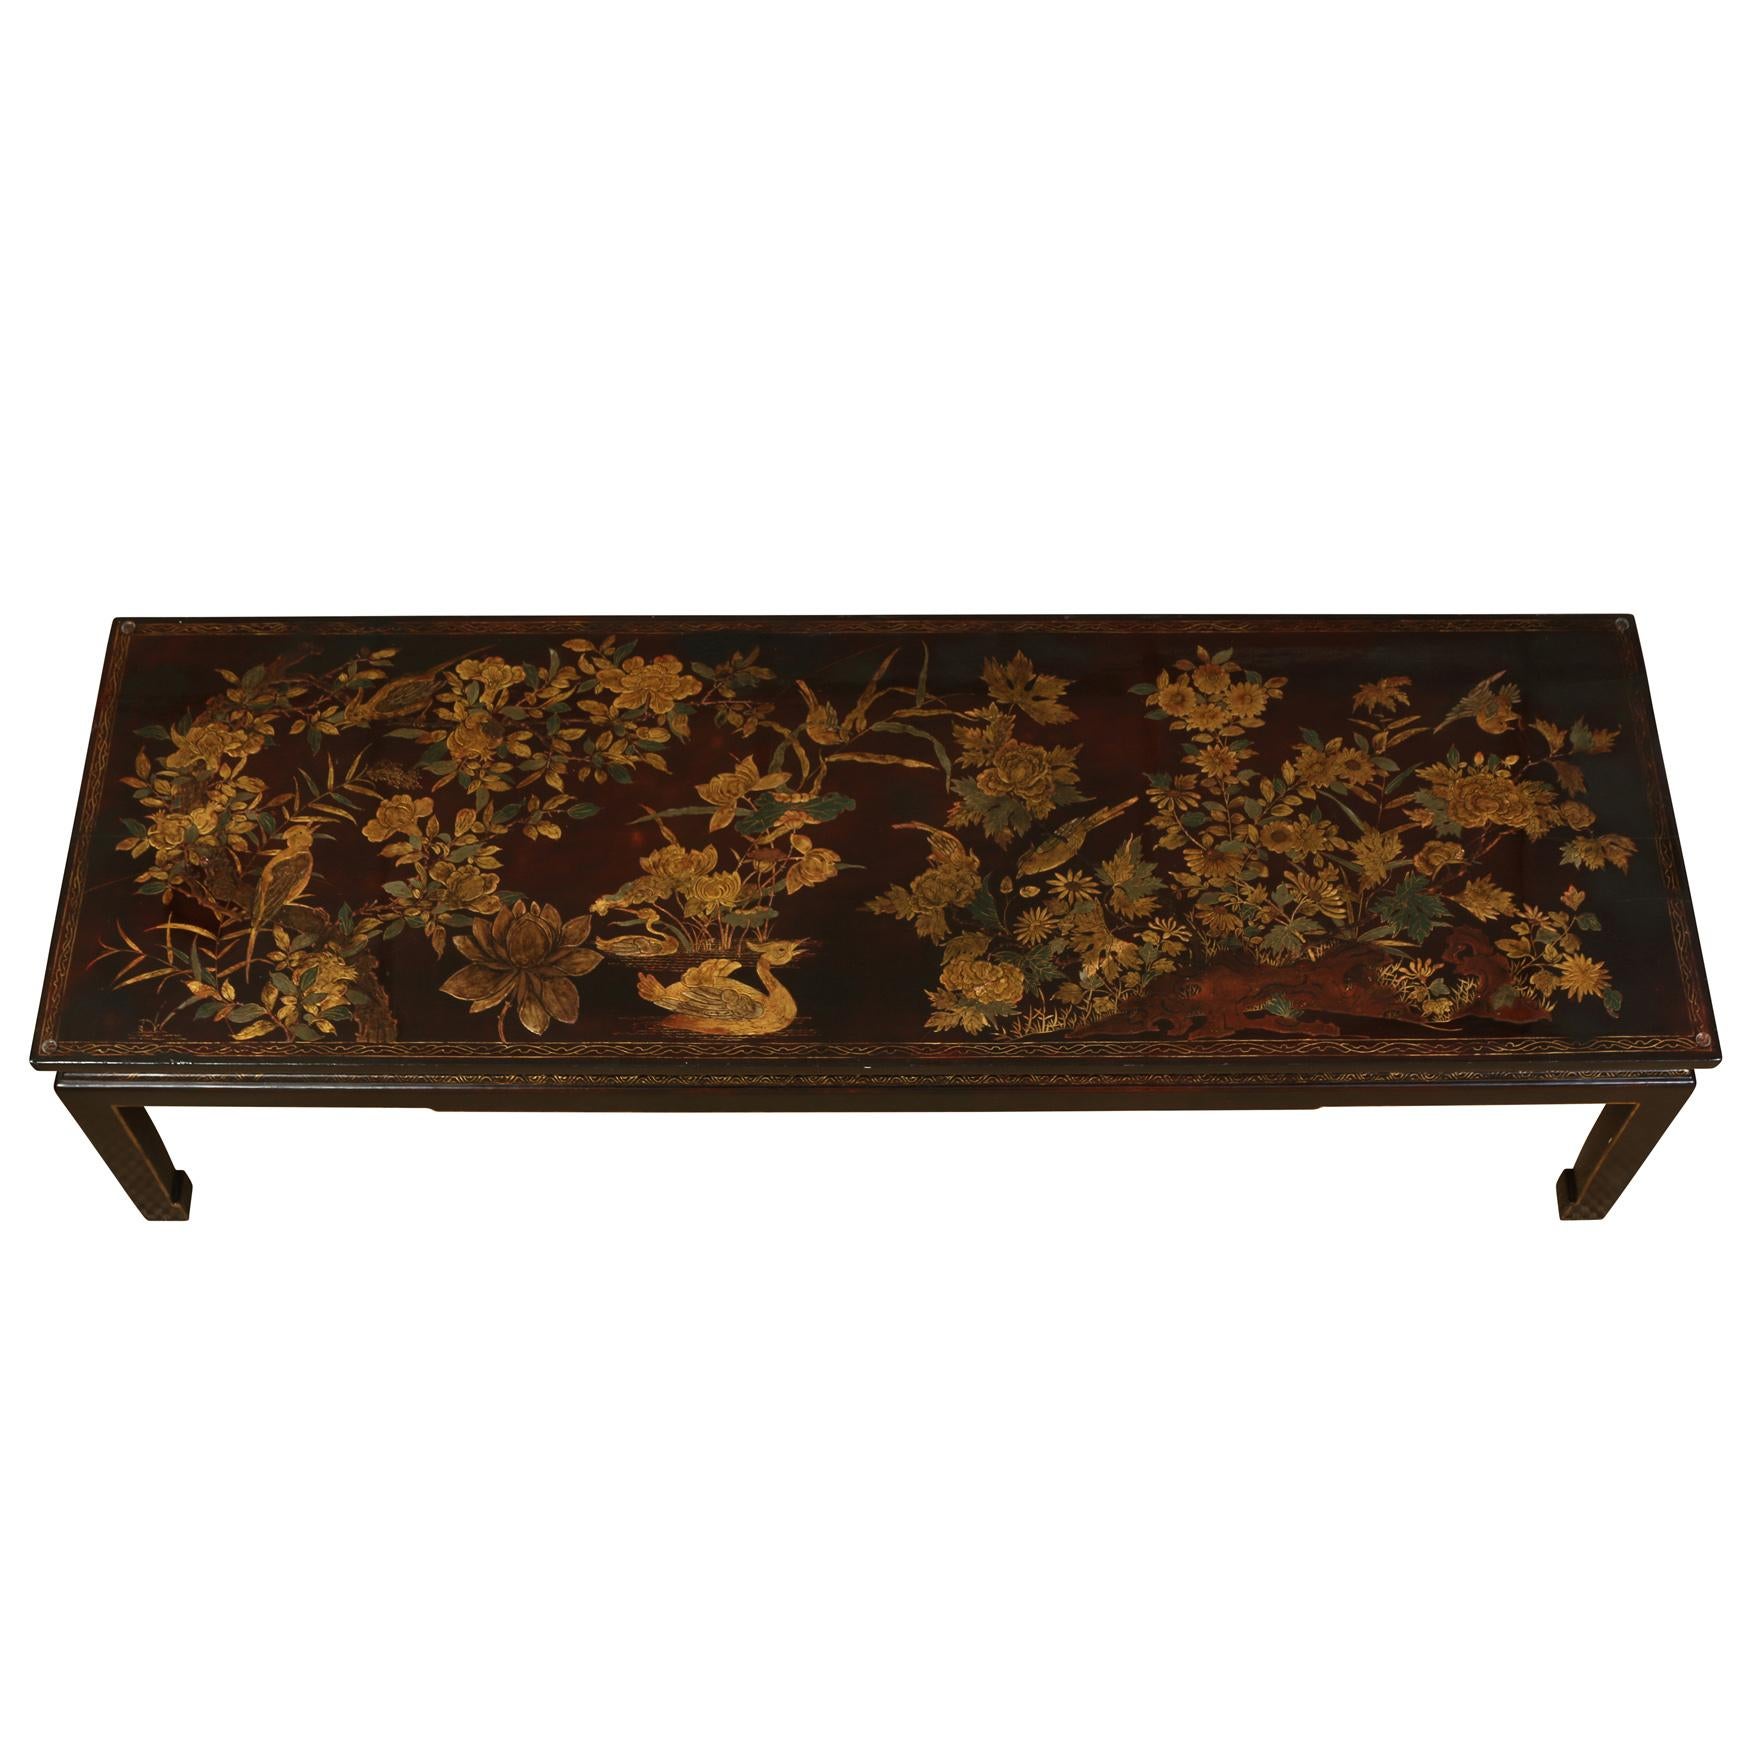 20th Century Chinoiserie Gilt Decorated Chocolate Brown Coffee Table With Glass Top For Sale